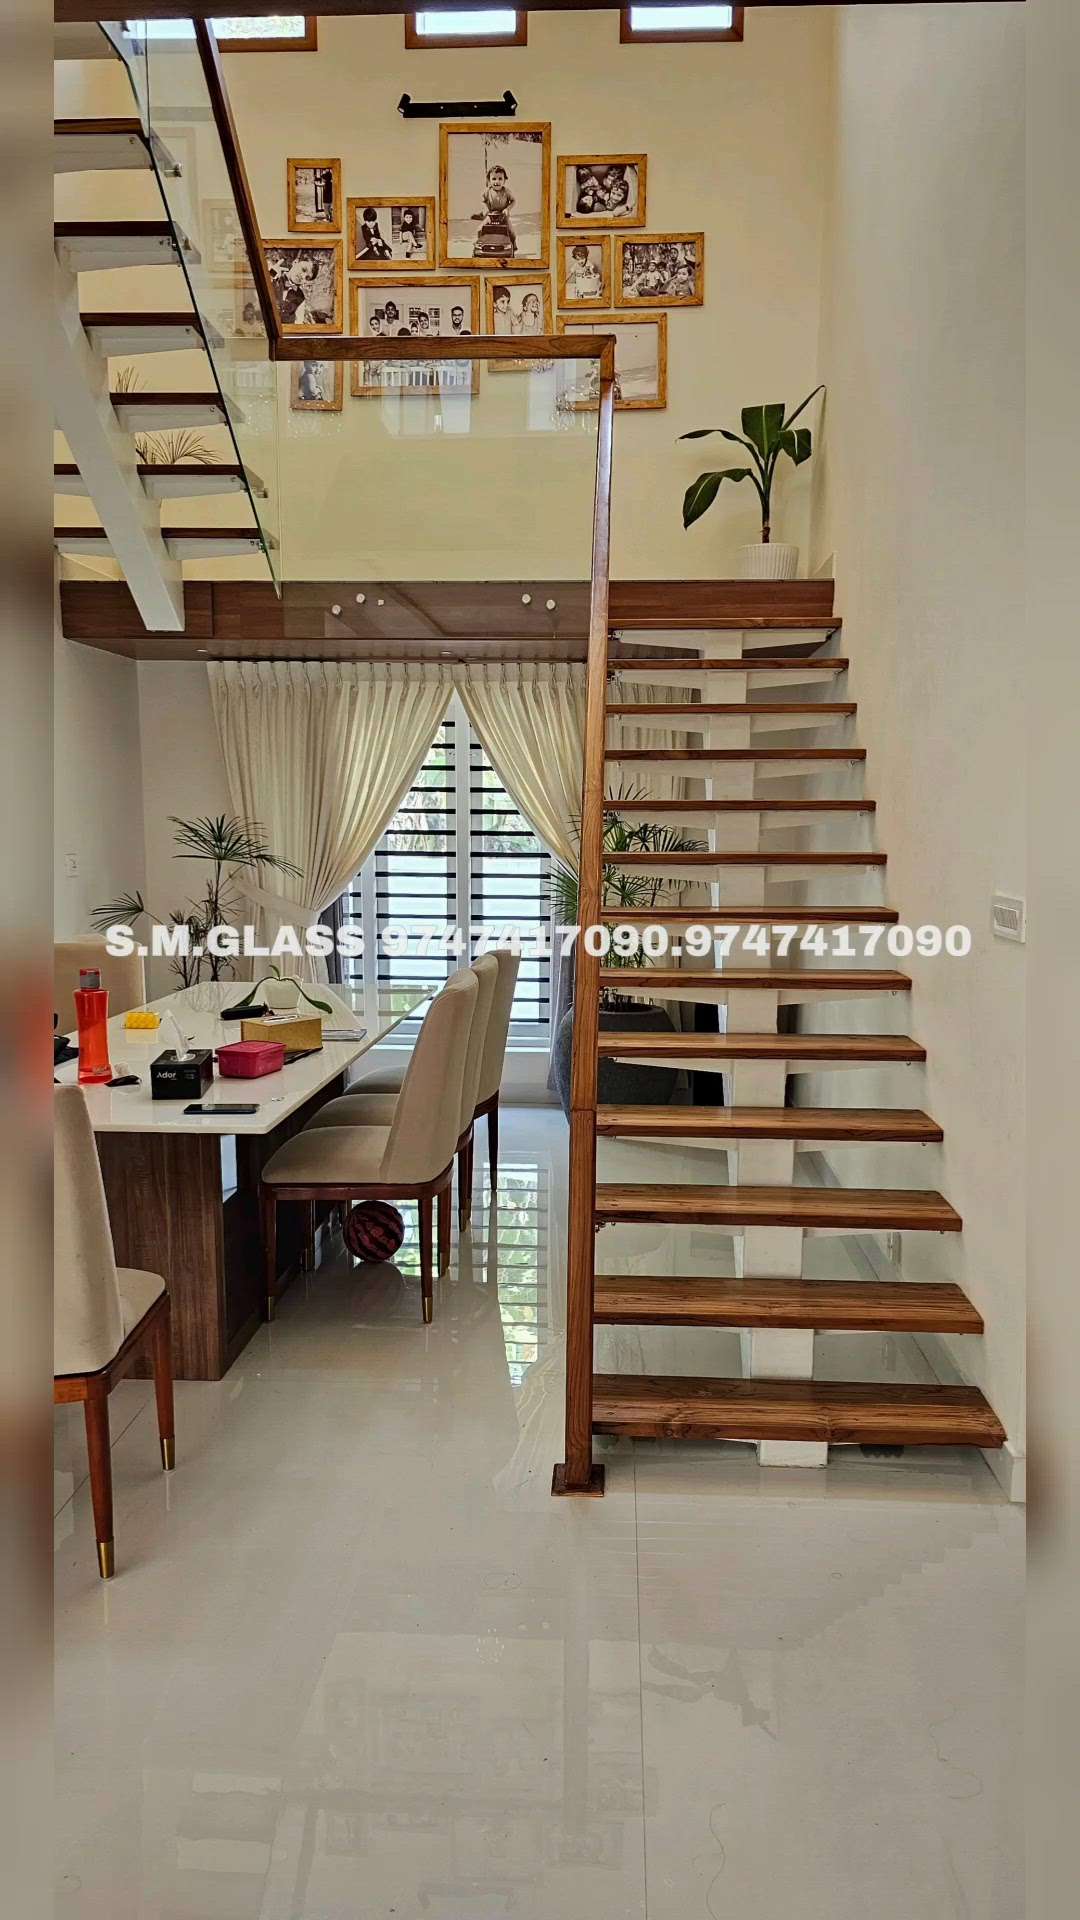 WOOD AND GLASS HANDRAIL WORK IN SPIRAL STAIRCASE....

ALL AROUND KERALA AND TAMILNADU   #GlassBalconyRailing 
 #GlassHandRailStaircase 
 #GlassStaircase  #glassworks 
 #handrails 
 #handrailstaircase 
 #spiralstaircase 
 #spiral